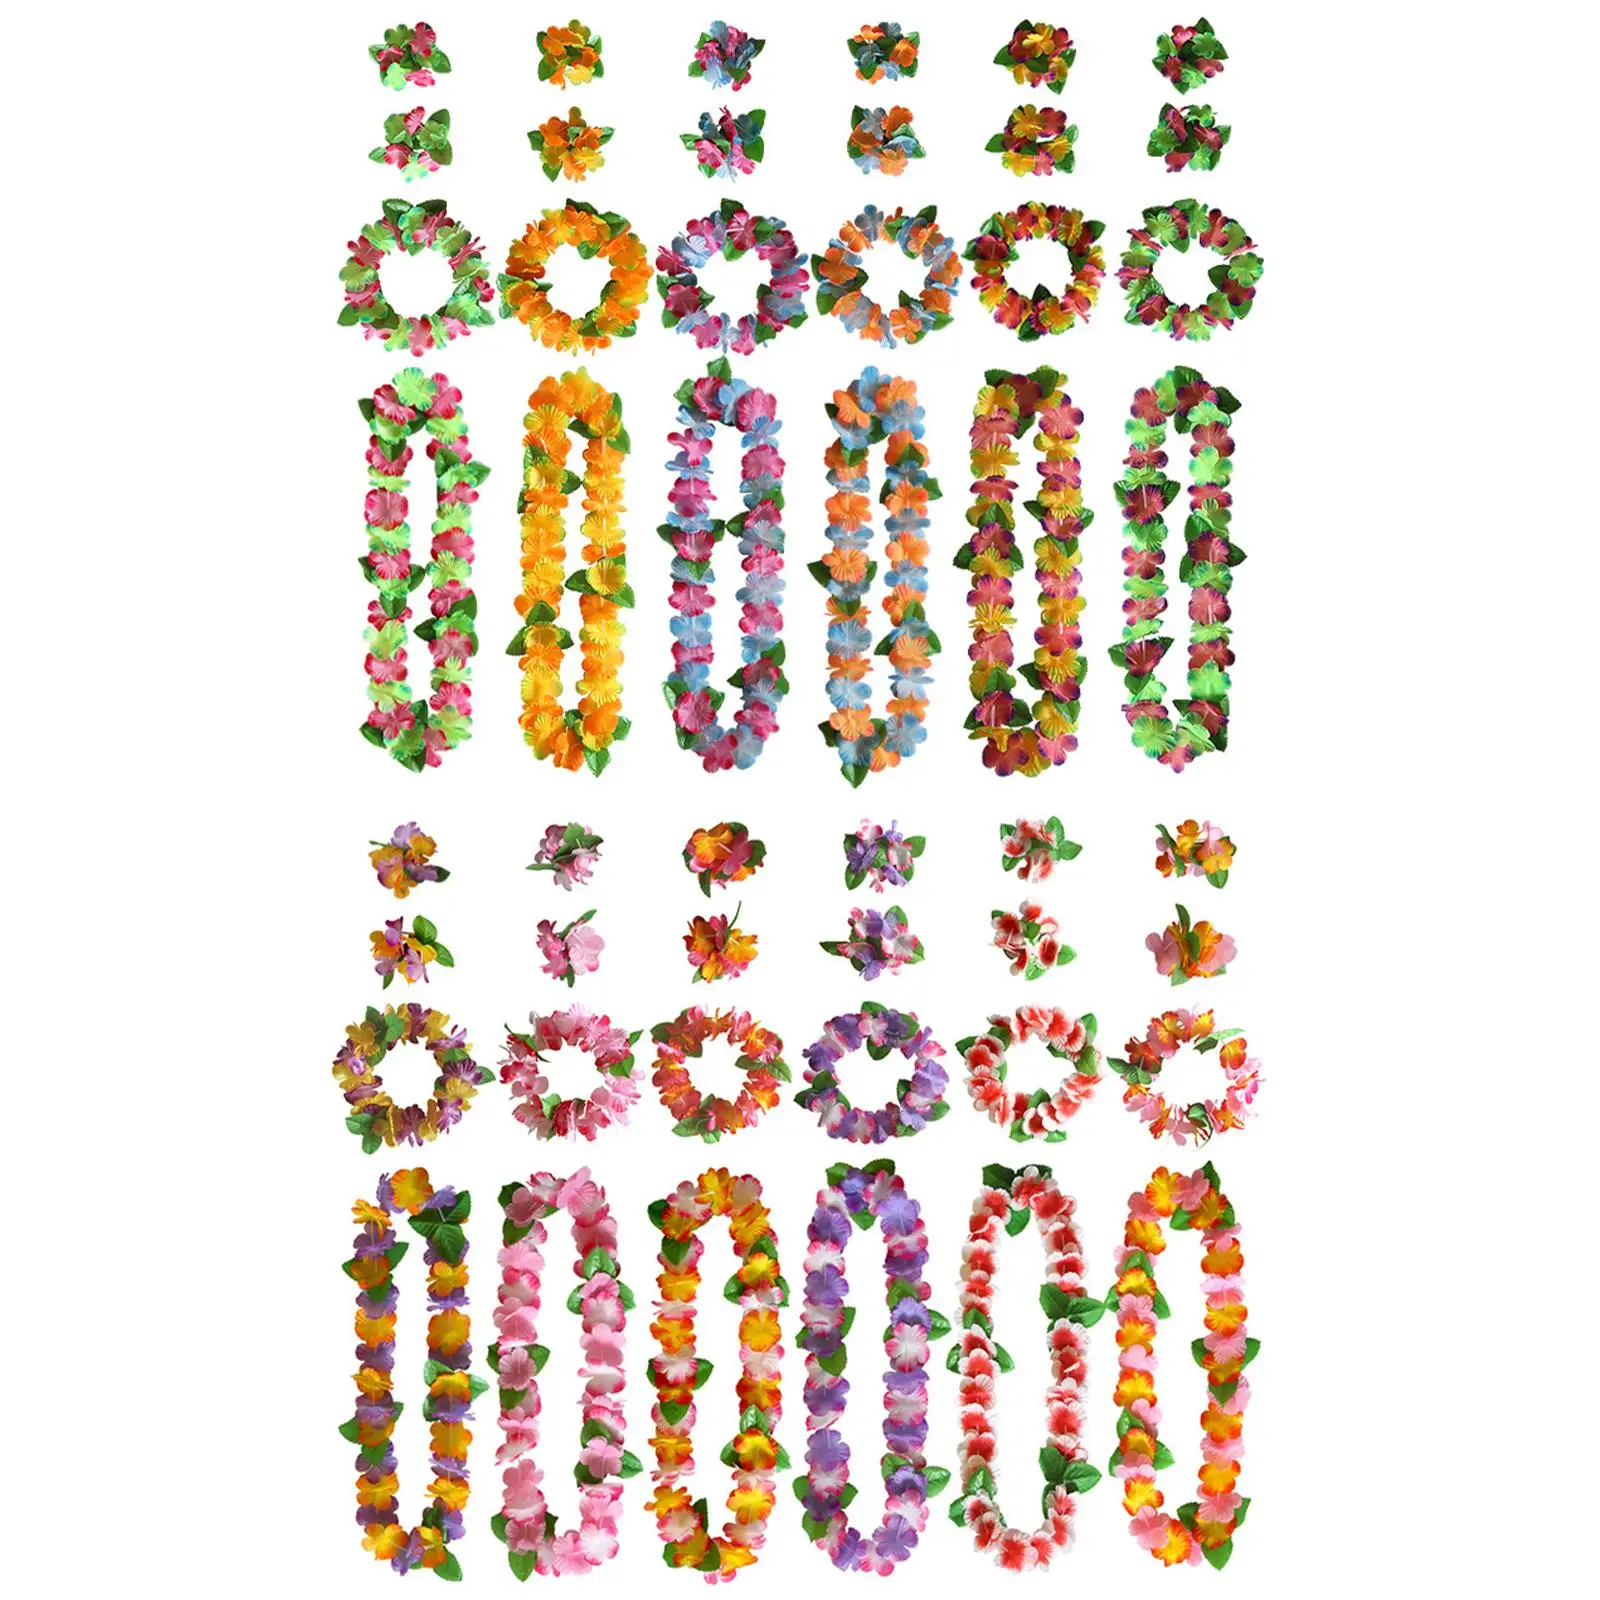 Hawaiian Leis Wearing A Tropical Flower Necklace for Decoration